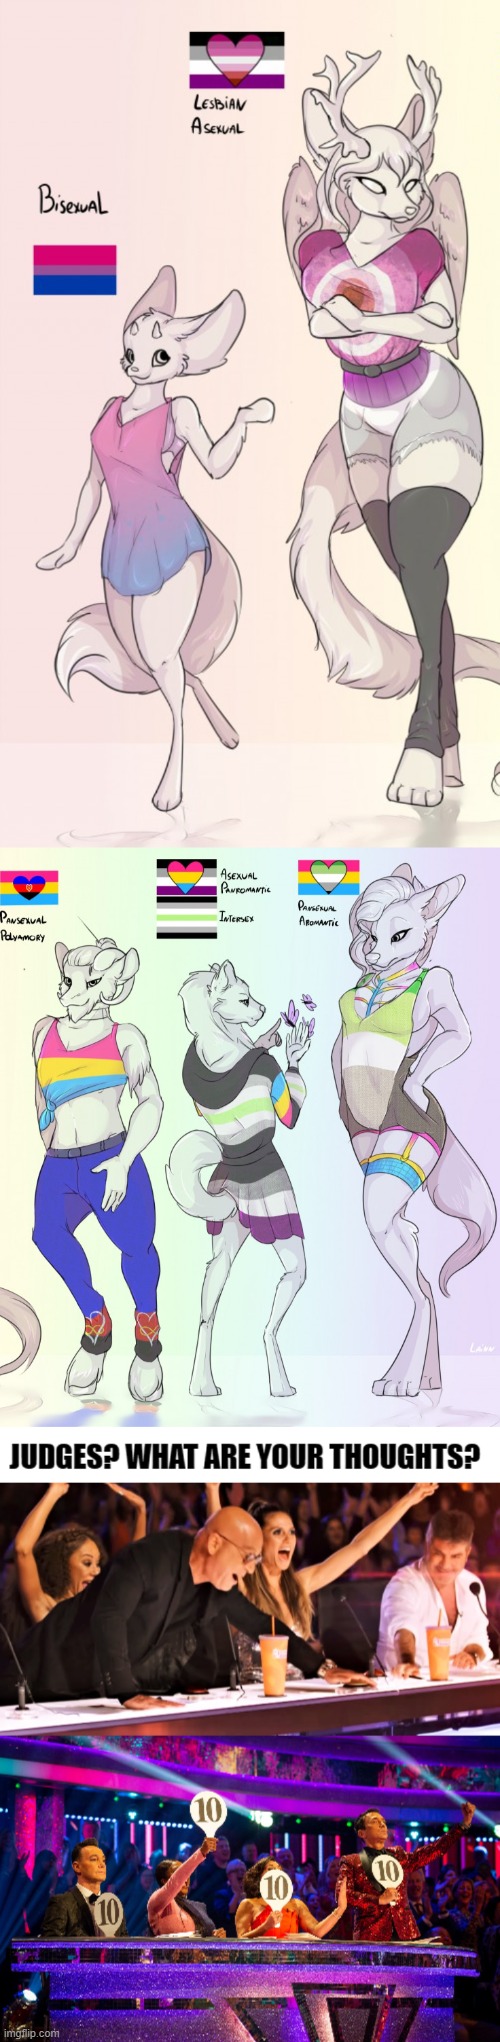 10/10 What I wanna wear! | image tagged in furry,fashion,memes,judges,clothes,lgbtq | made w/ Imgflip meme maker